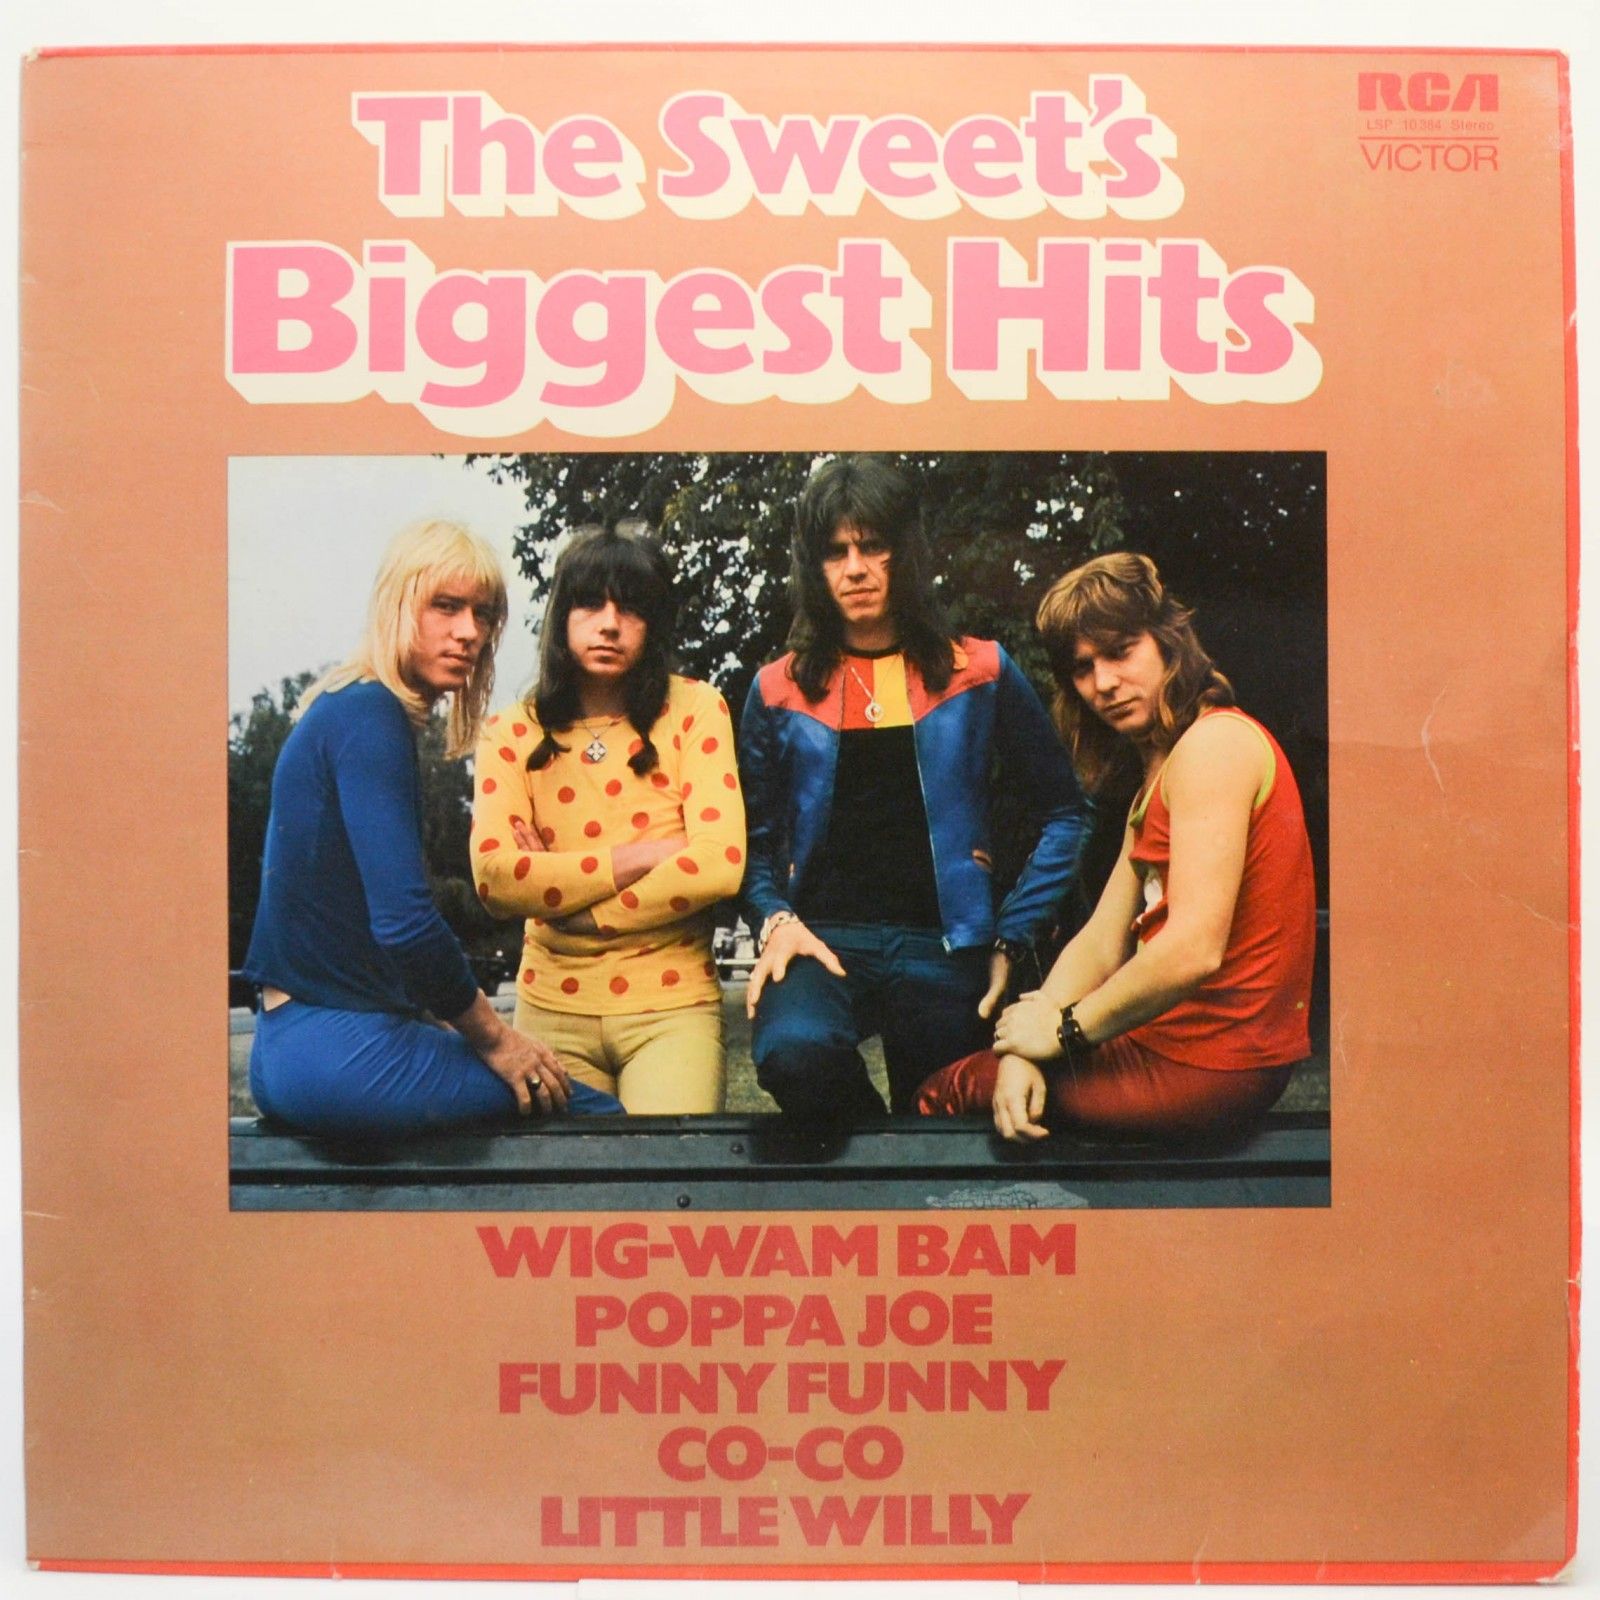 Sweet — The Sweet's Biggest Hits, 1972